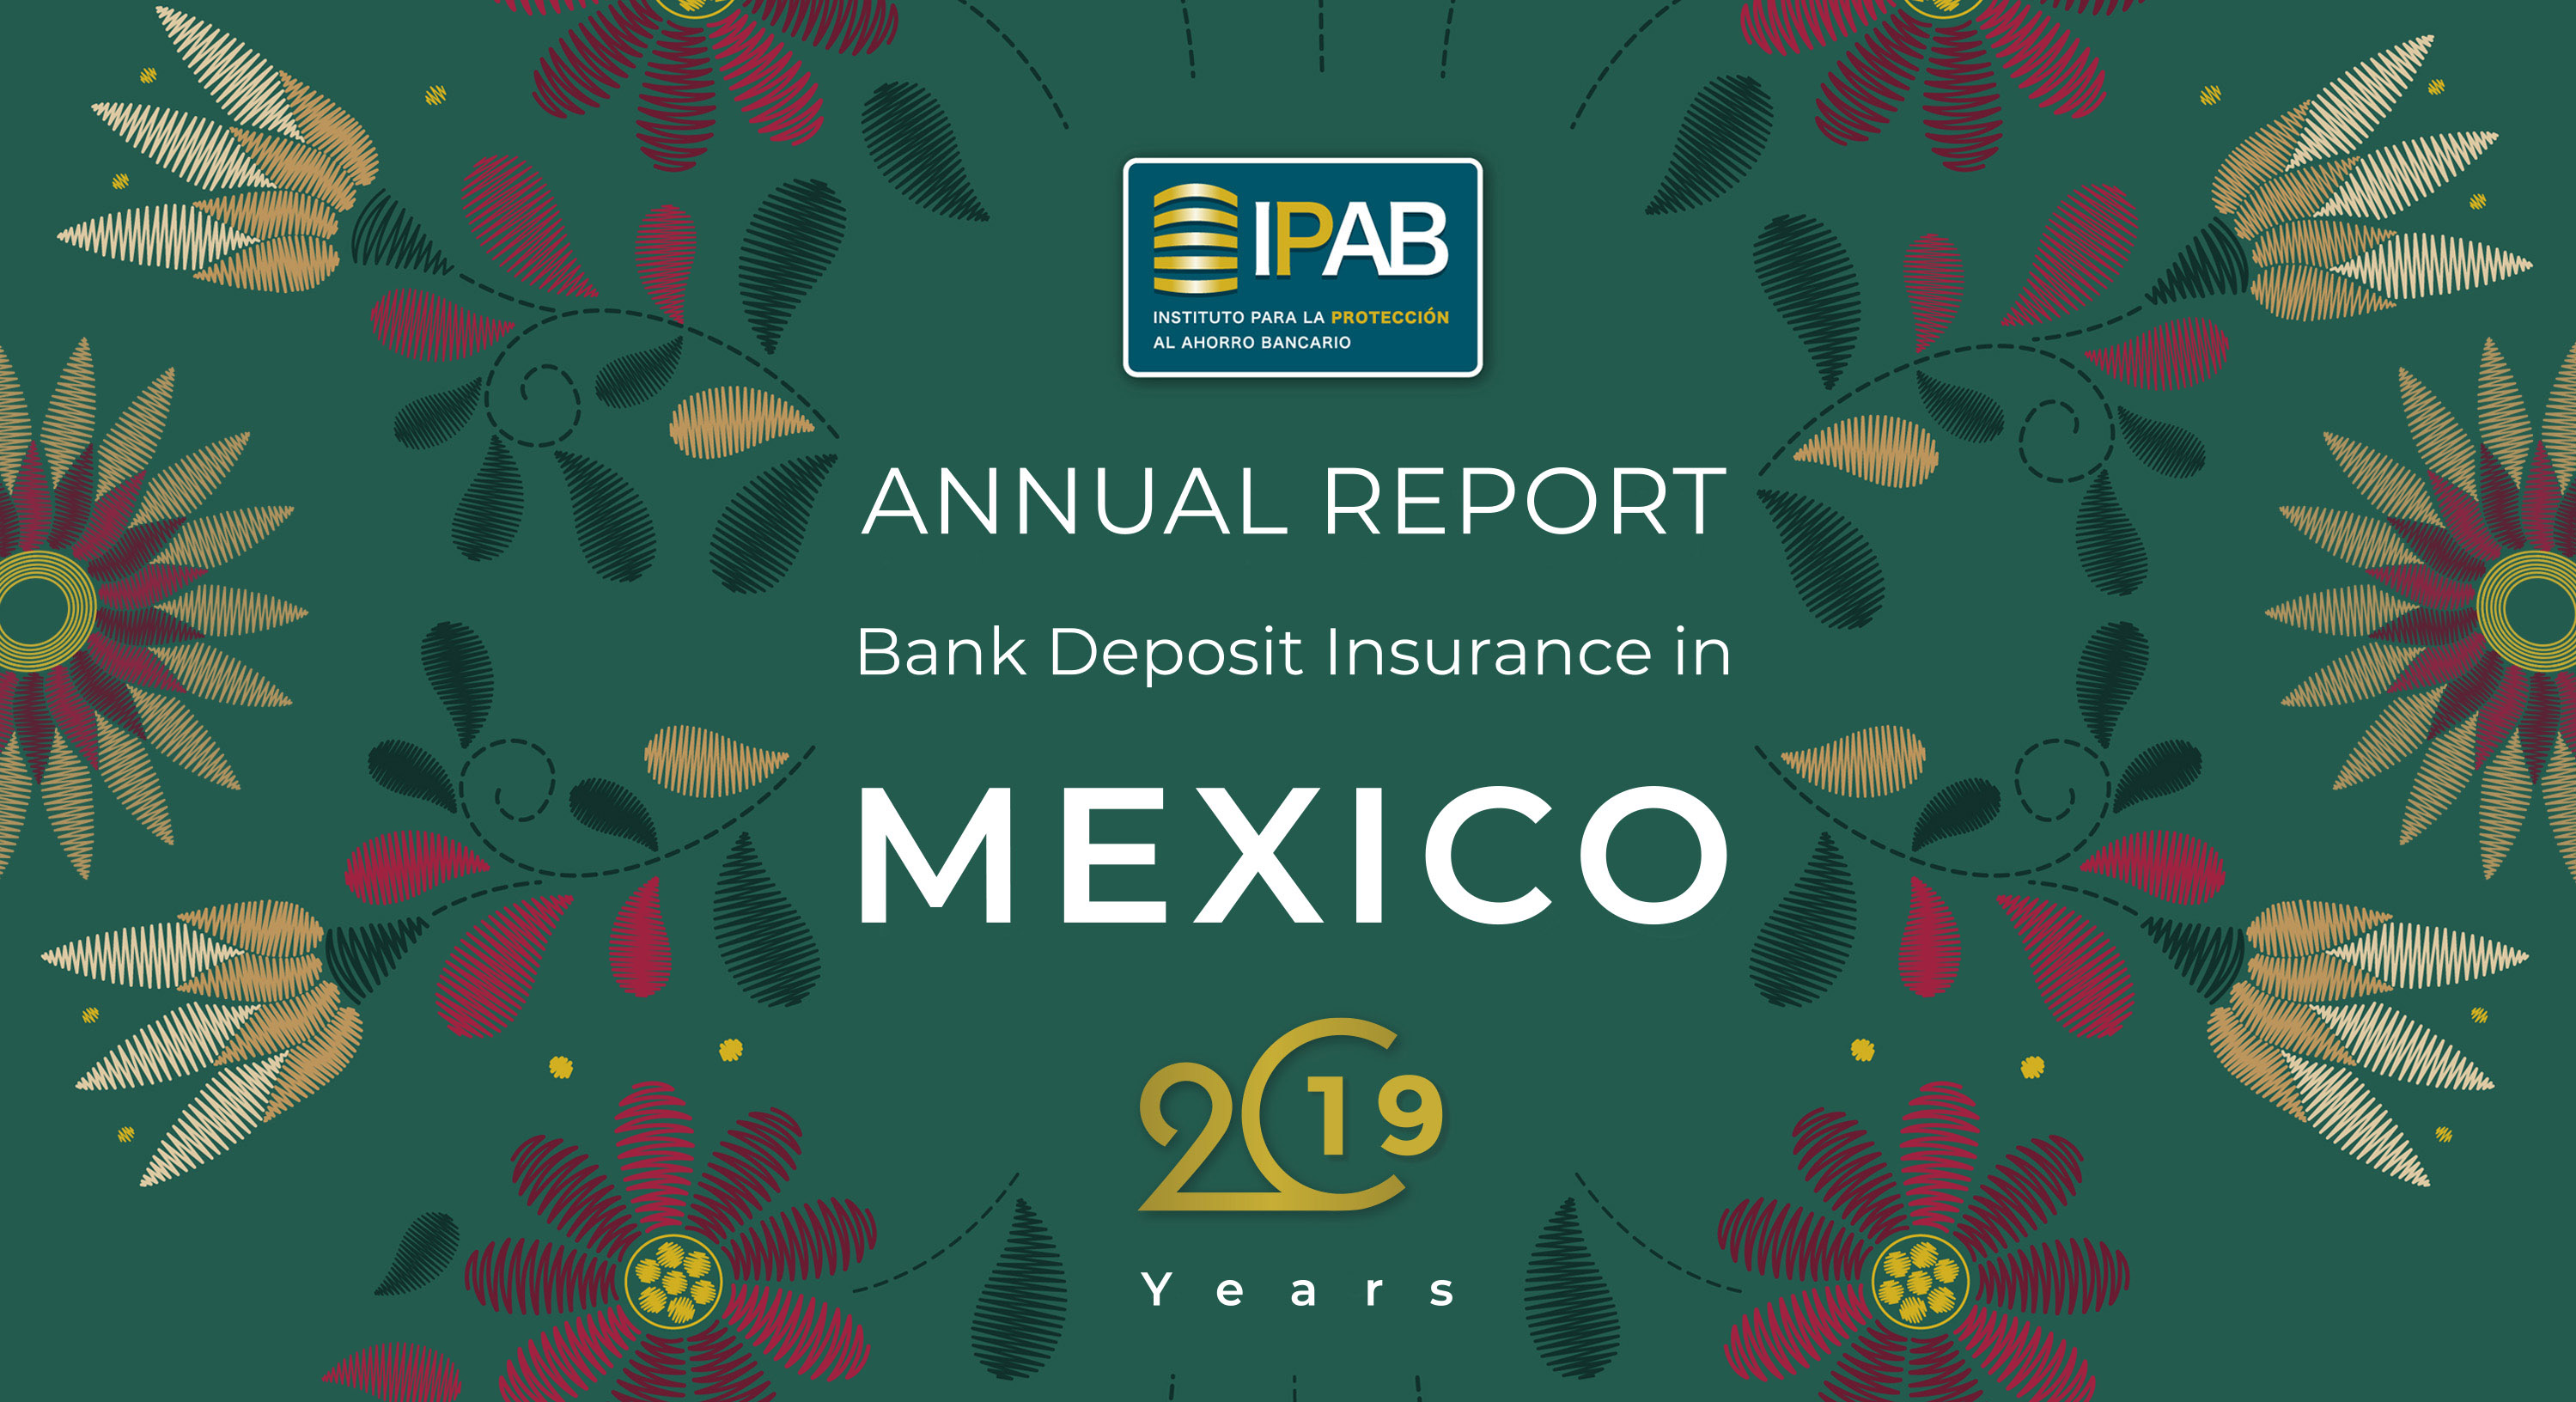 IPAB’s Annual Report: Bank Deposit Insurance in Mexico 2019.